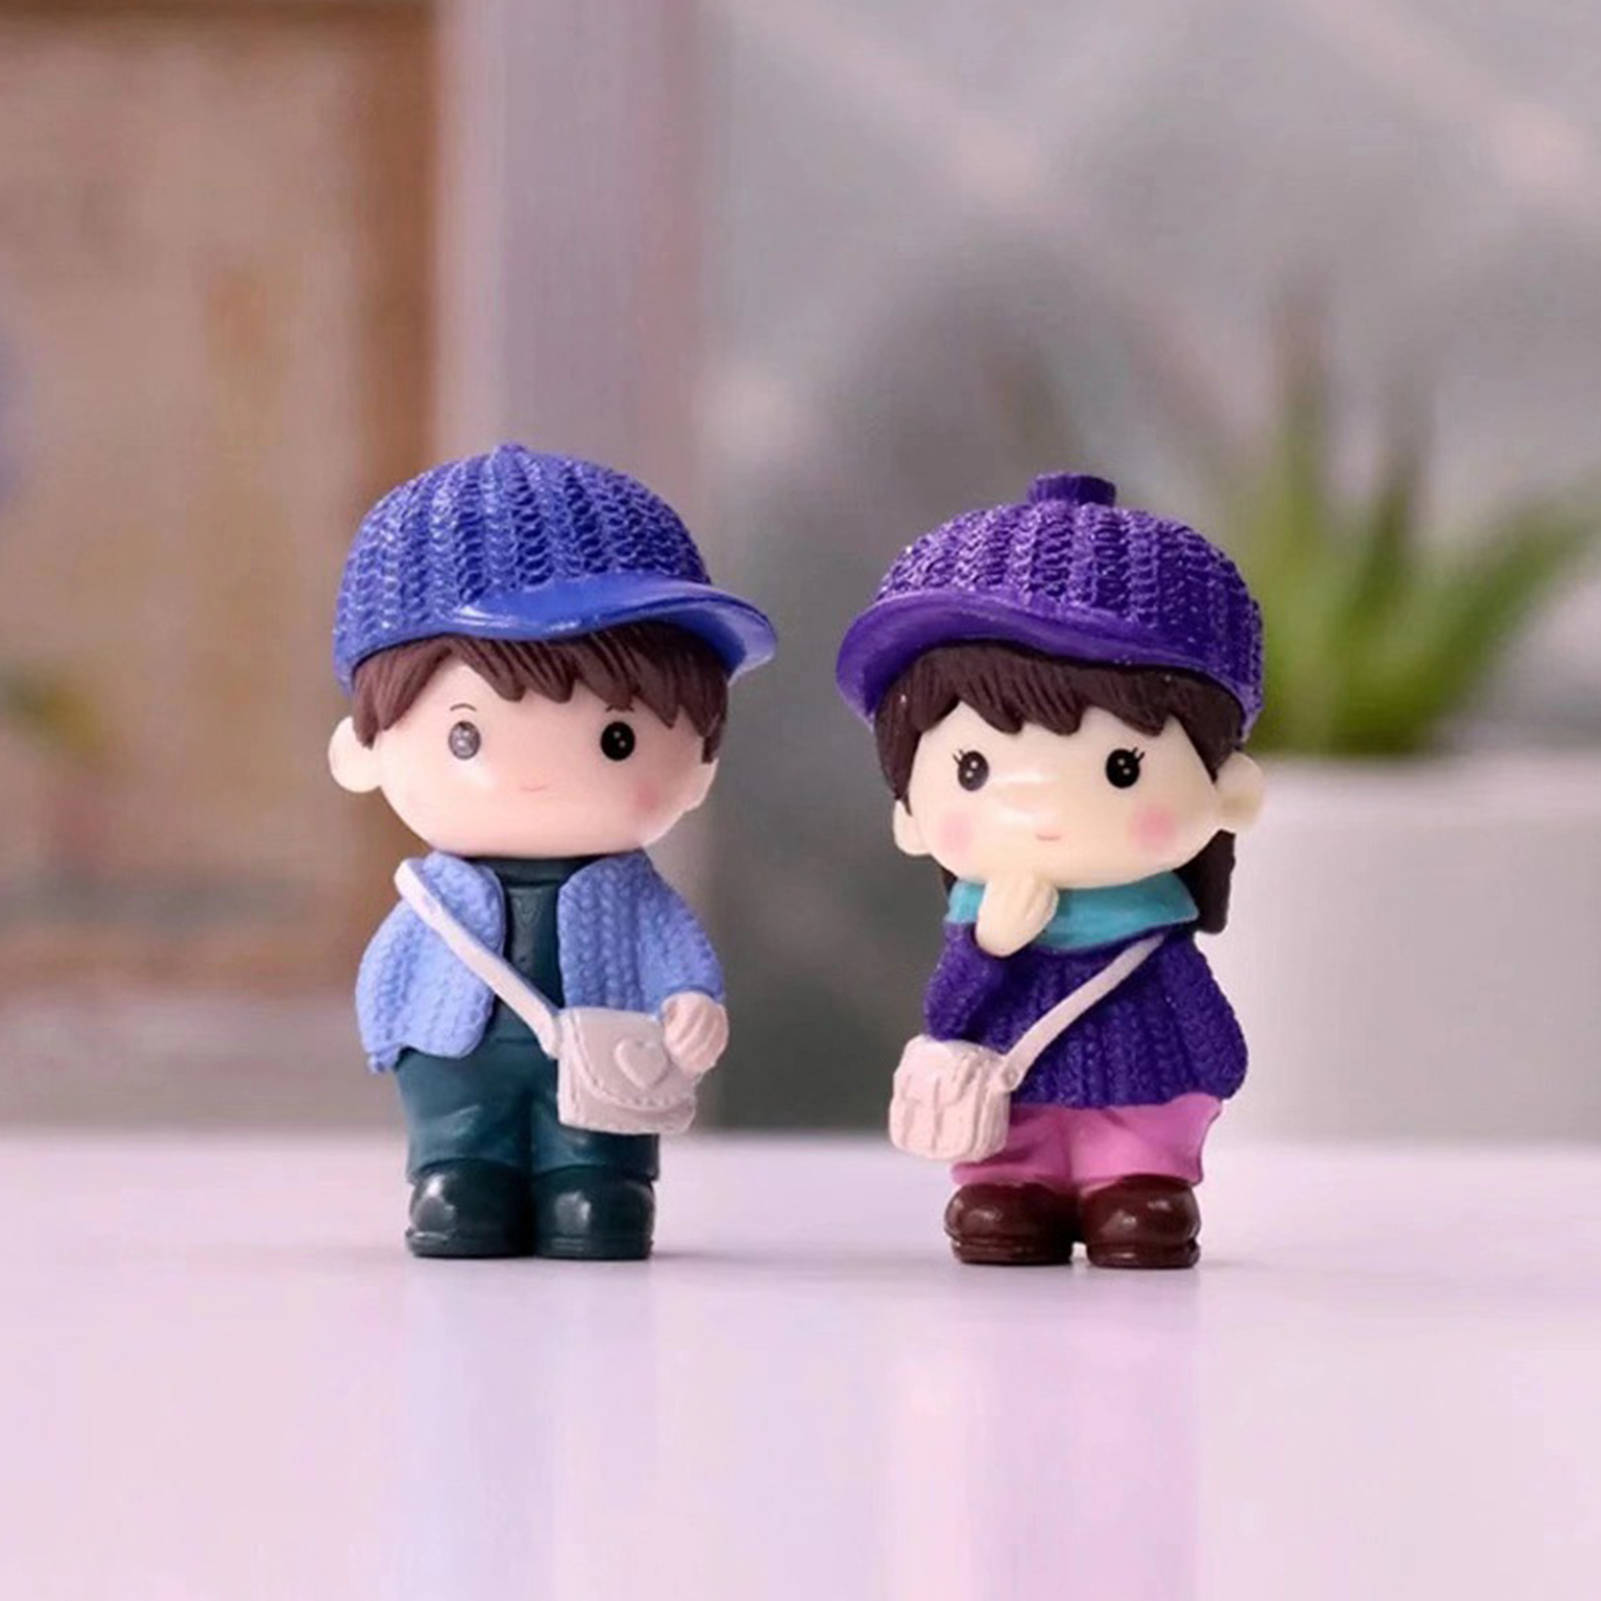 Download Cute Doll Couple With Purple Hats Wallpaper 